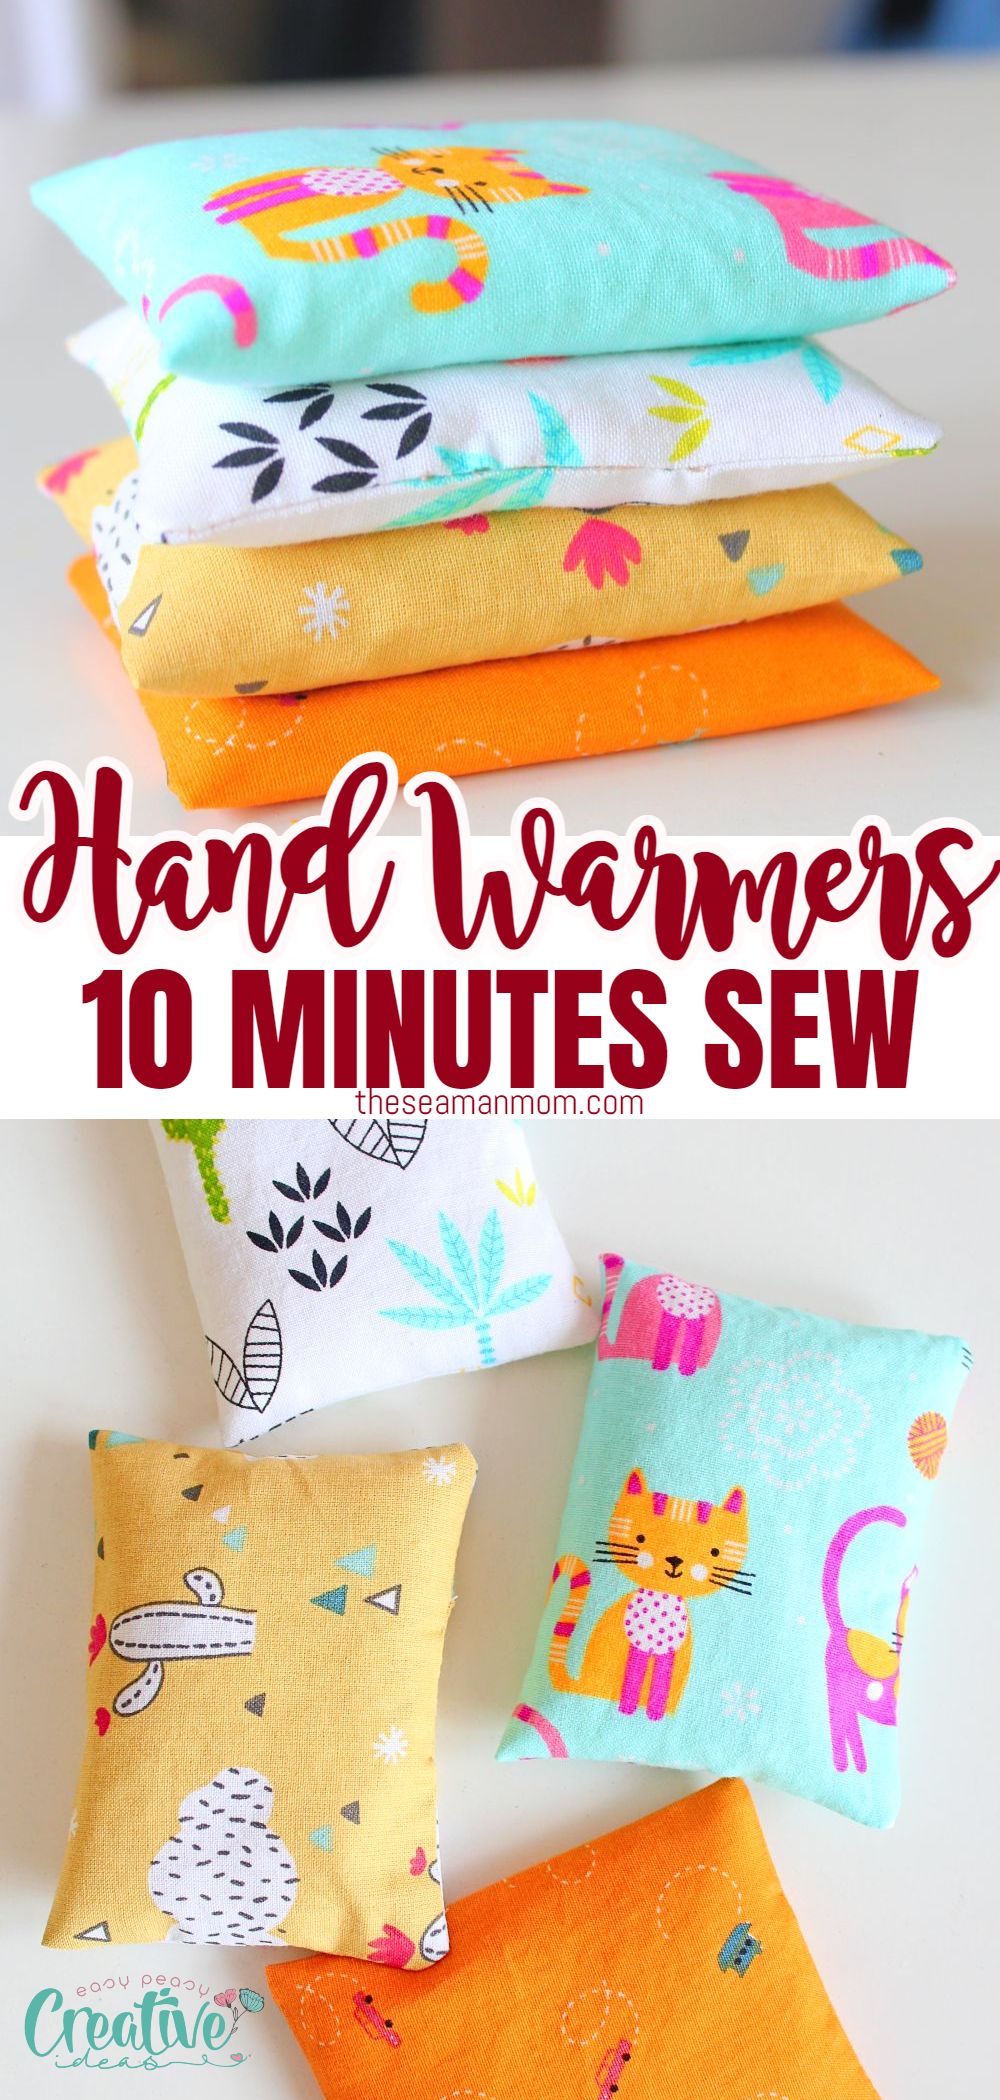 Say goodbye to icy fingers and say hello to cozy comfort with these easy to sew DIY hand warmers. Don't let cold hands ruin your day – warm them up with this fantastic 10 minutes sewing project! via @petroneagu